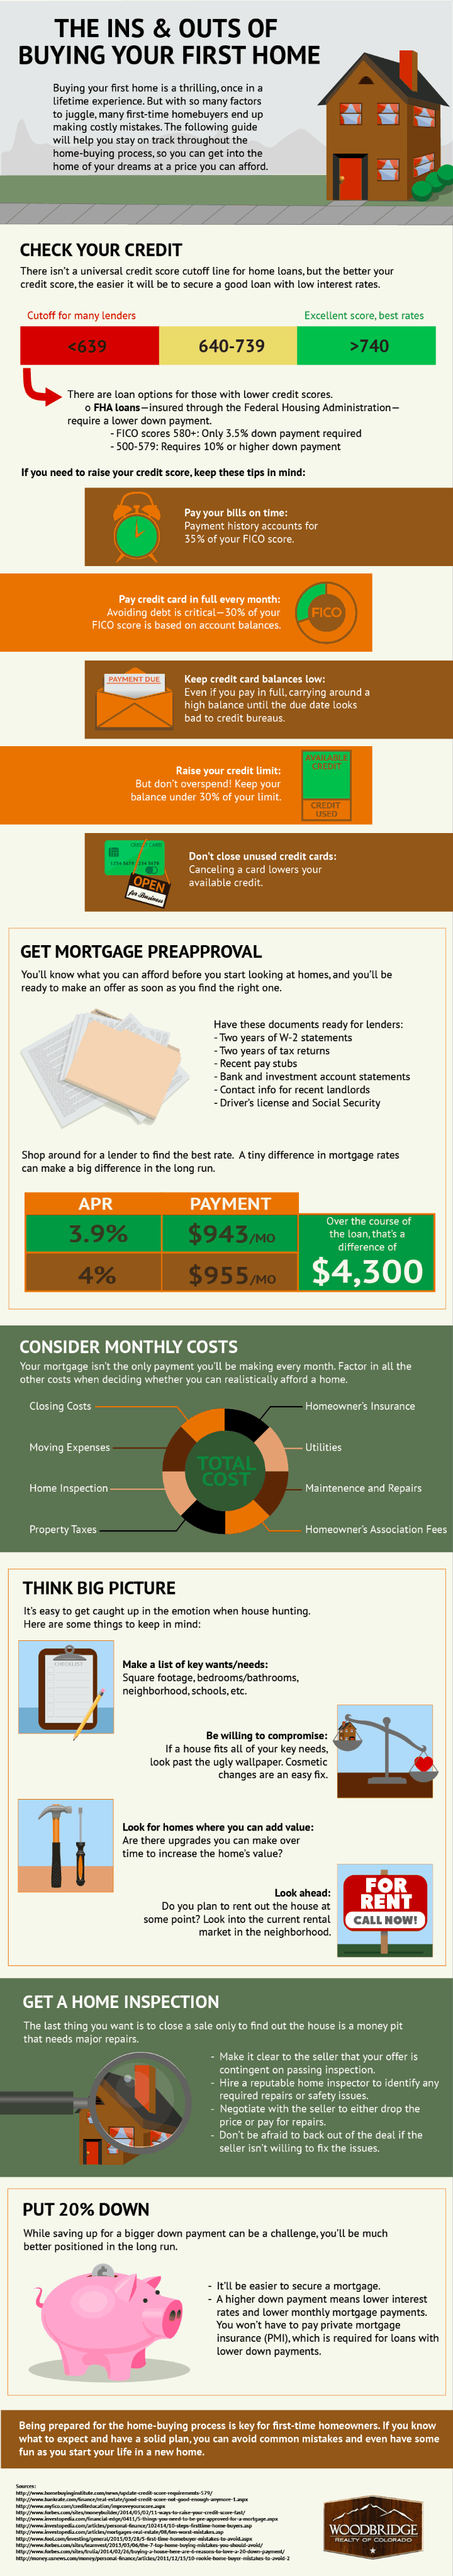 infographic_buying_first_home